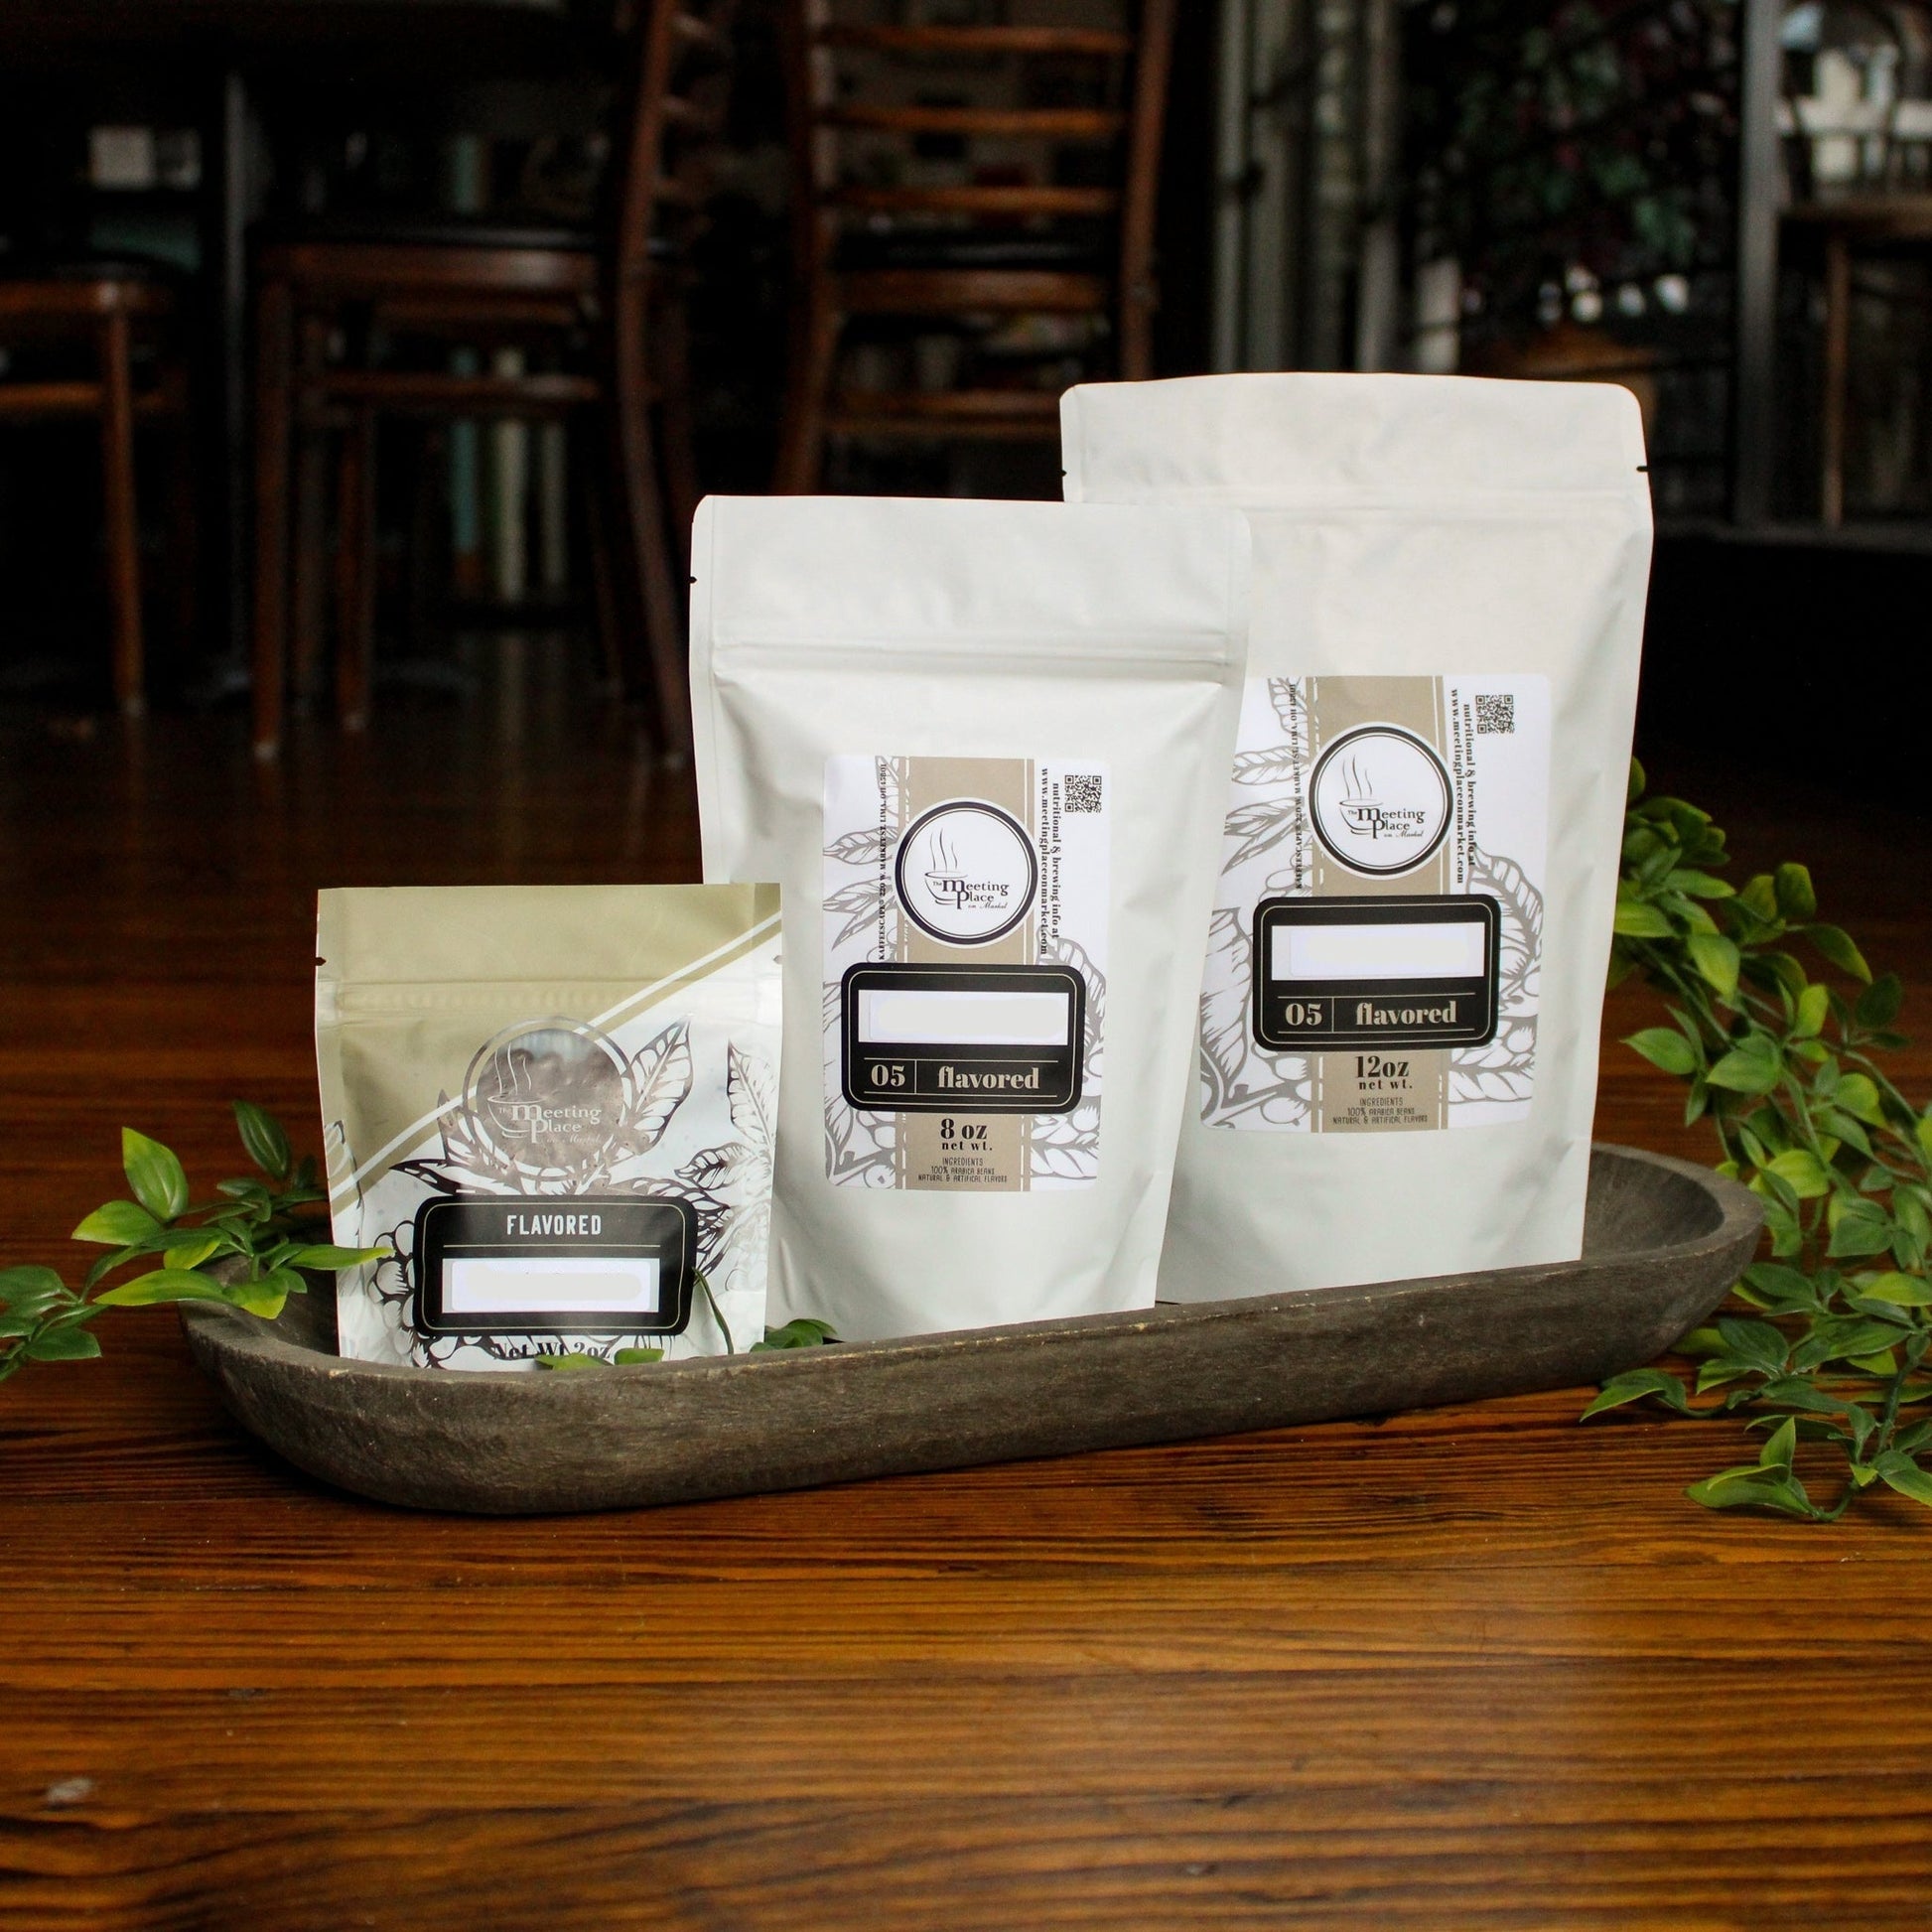 Creme Brulee Coffee Beans / Ground Coffee Gourmet Coffee - The Meeting Place on Market